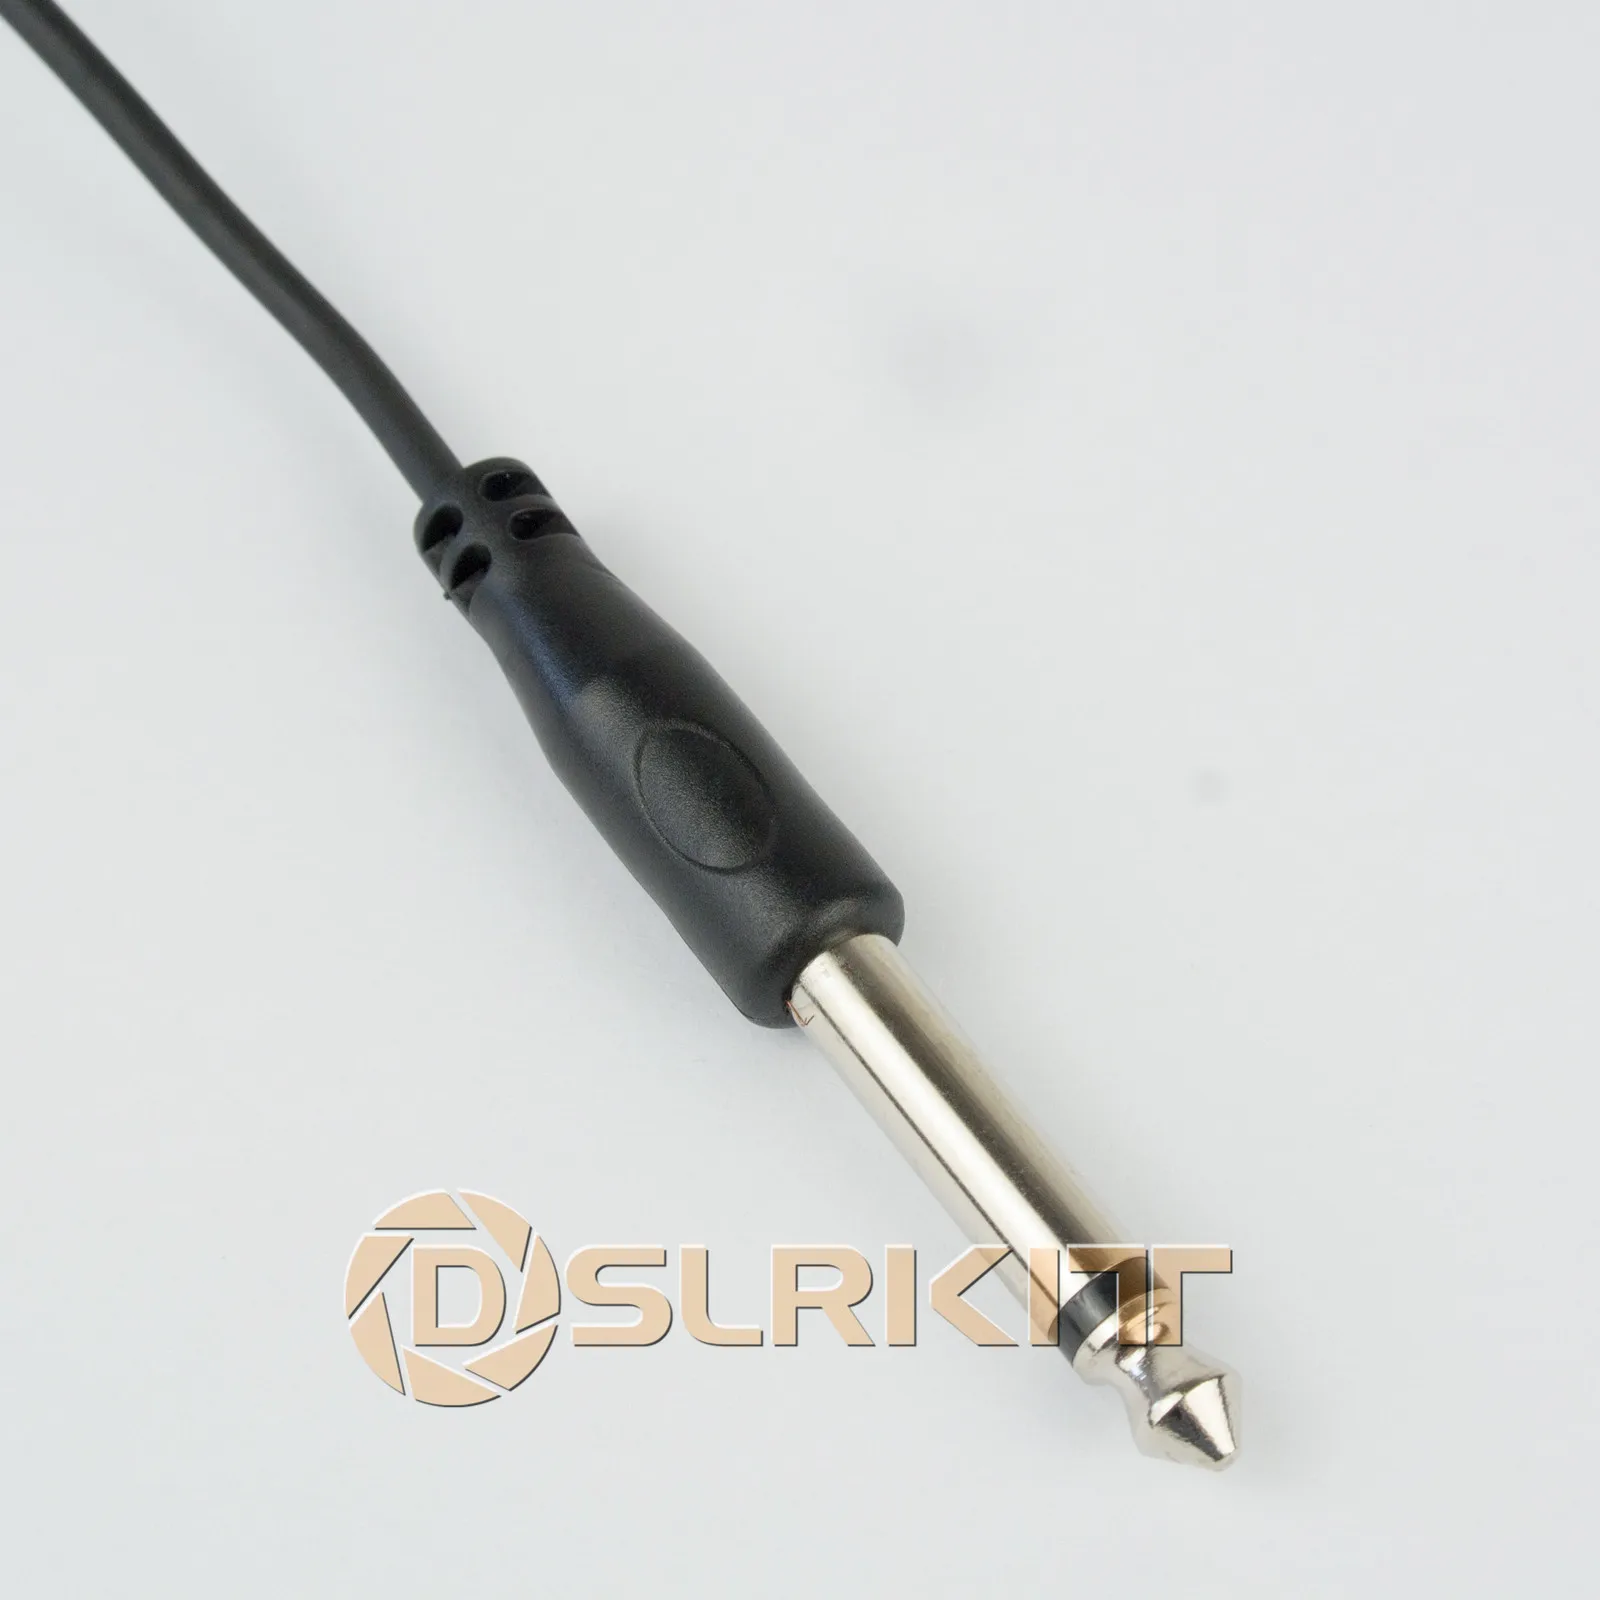 6.35mm 1/4" Plug to Male FLASH PC Sync Extend Spring Cable Cord with Screw Lock 